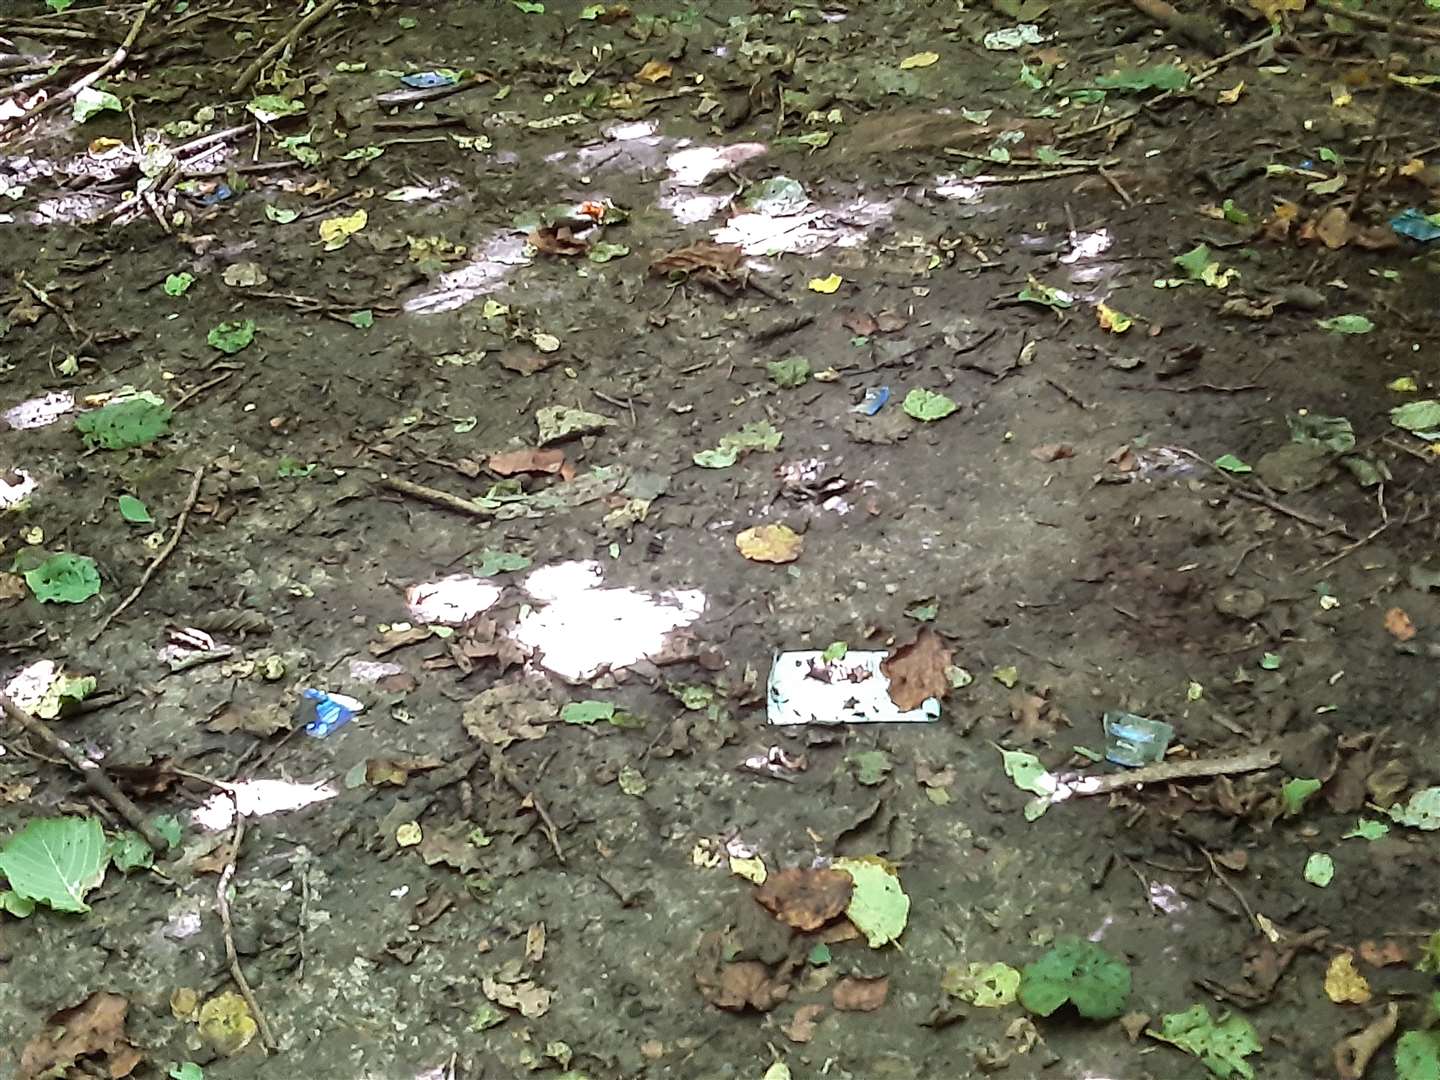 Used condom wrappers left strewn across the meadow